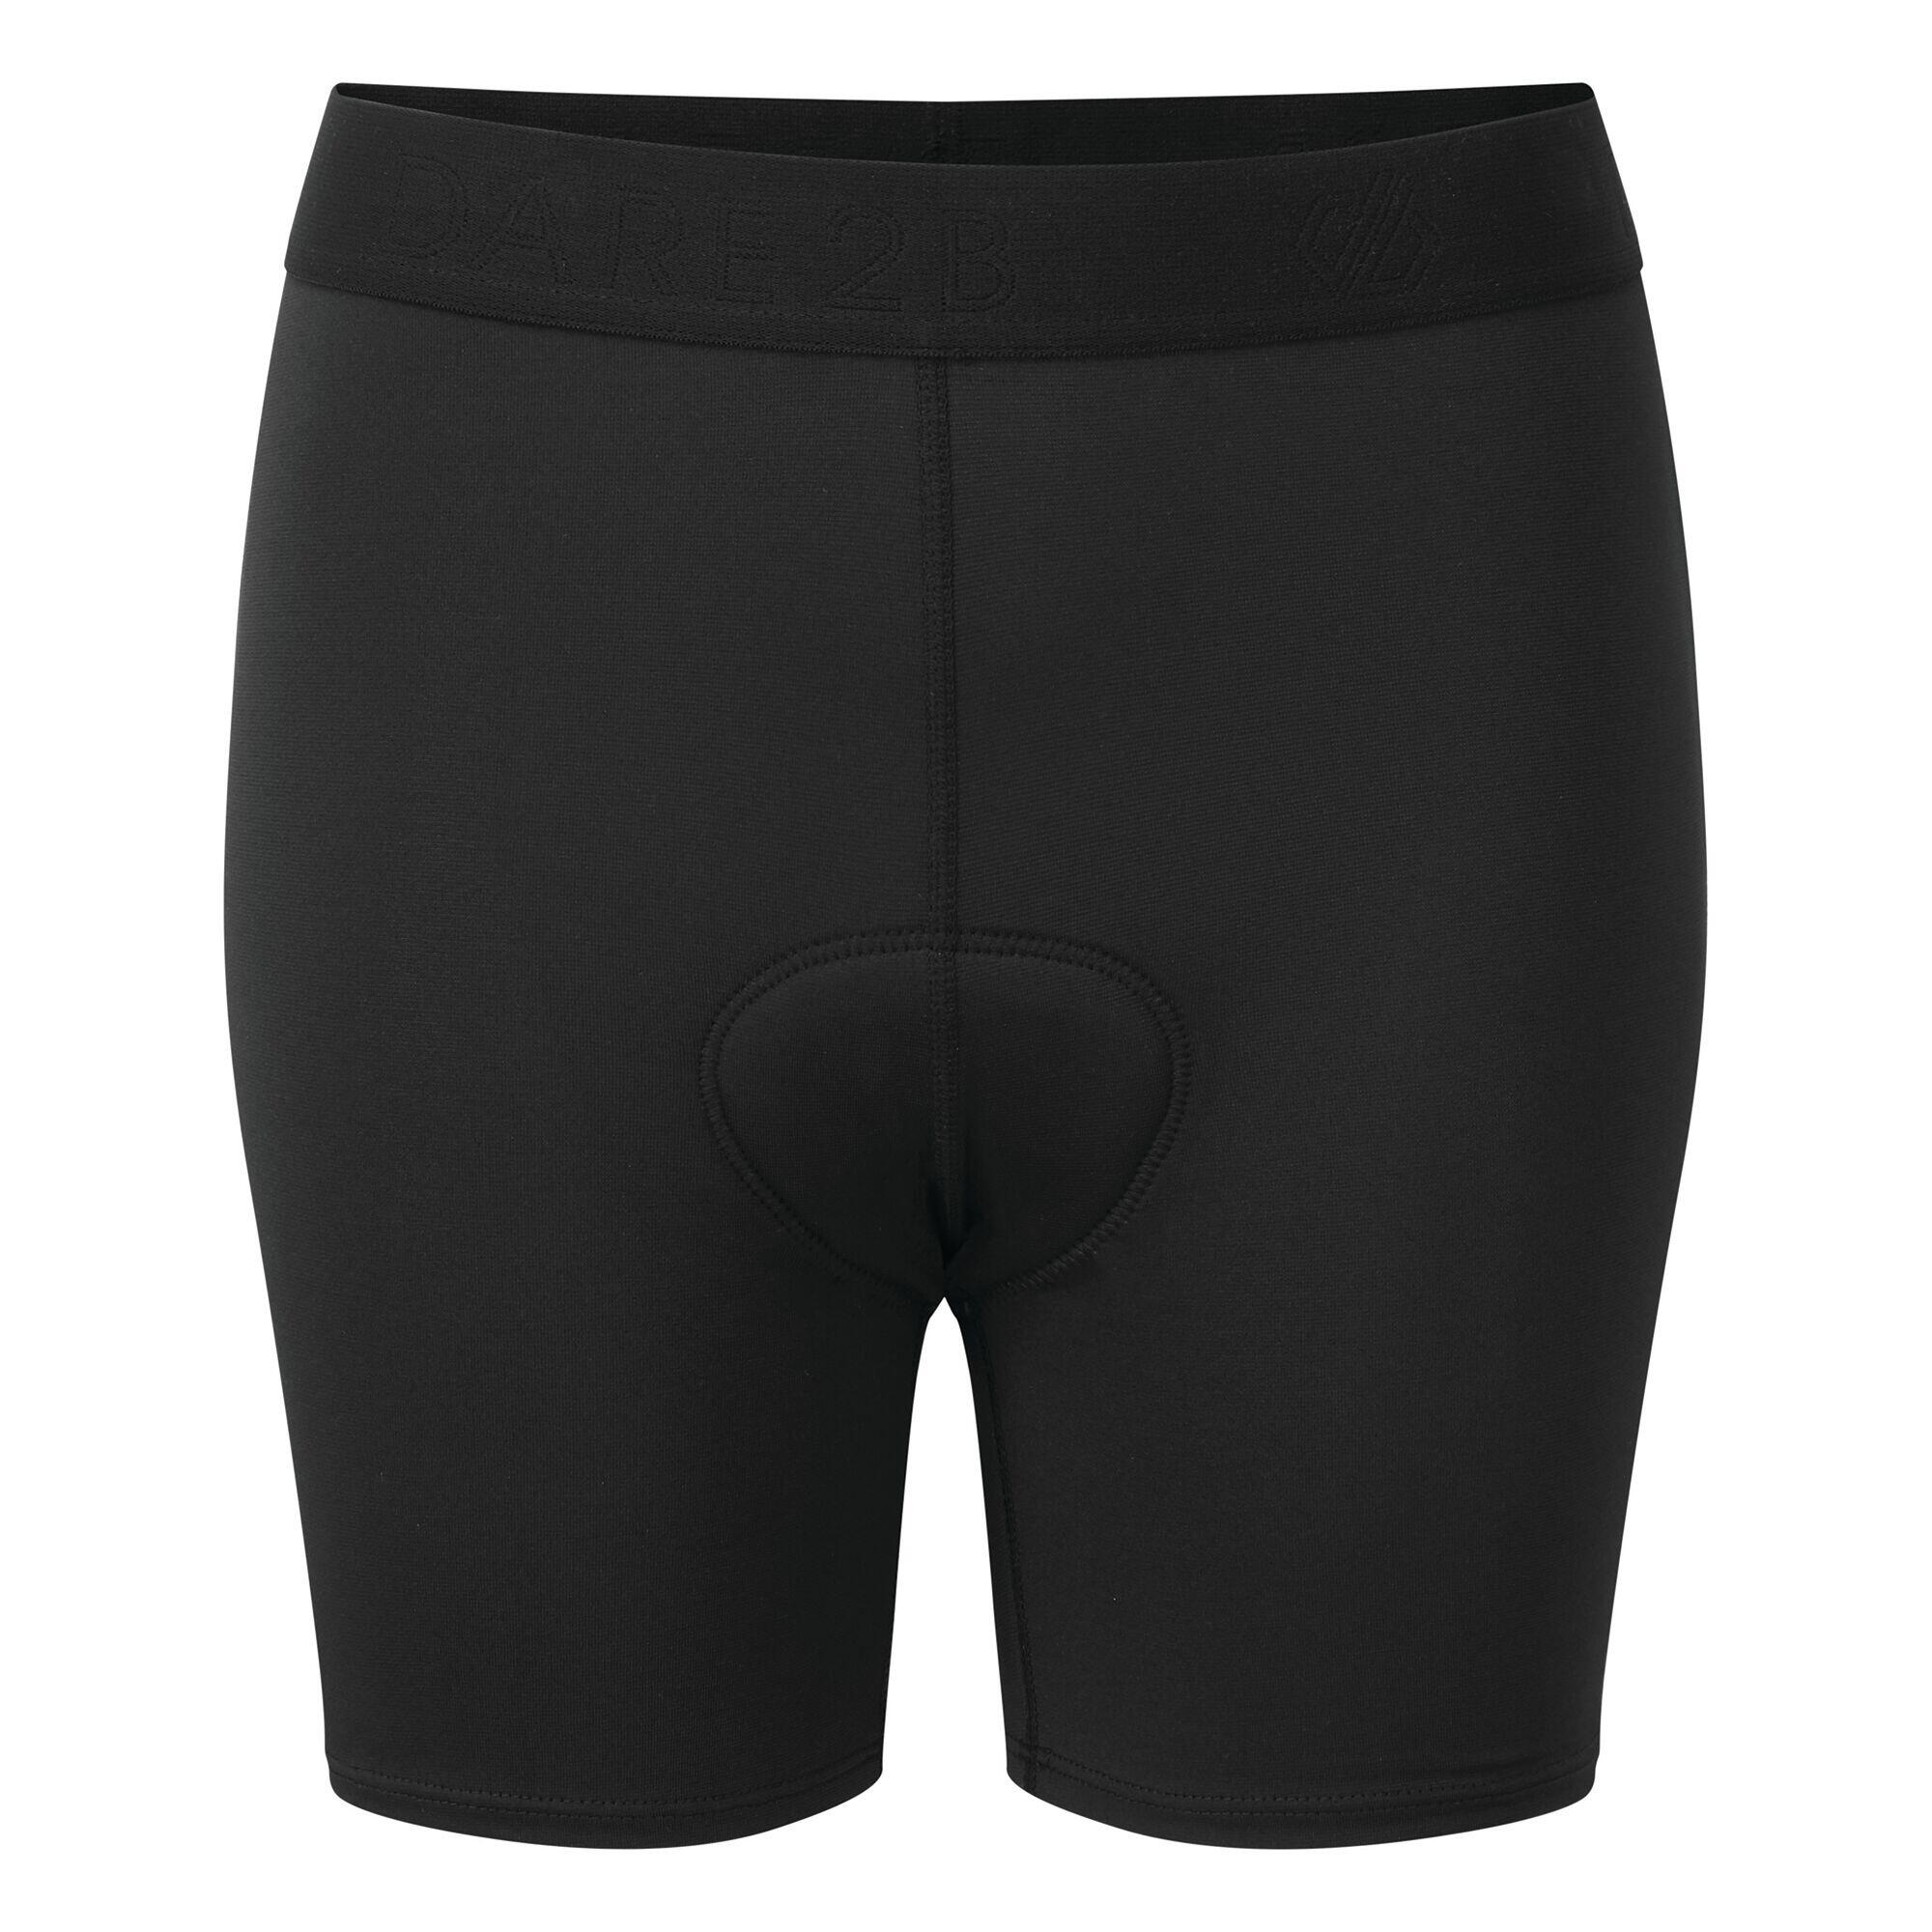 Womens/Ladies Recurrent Cycling Under Shorts (Black) 1/5